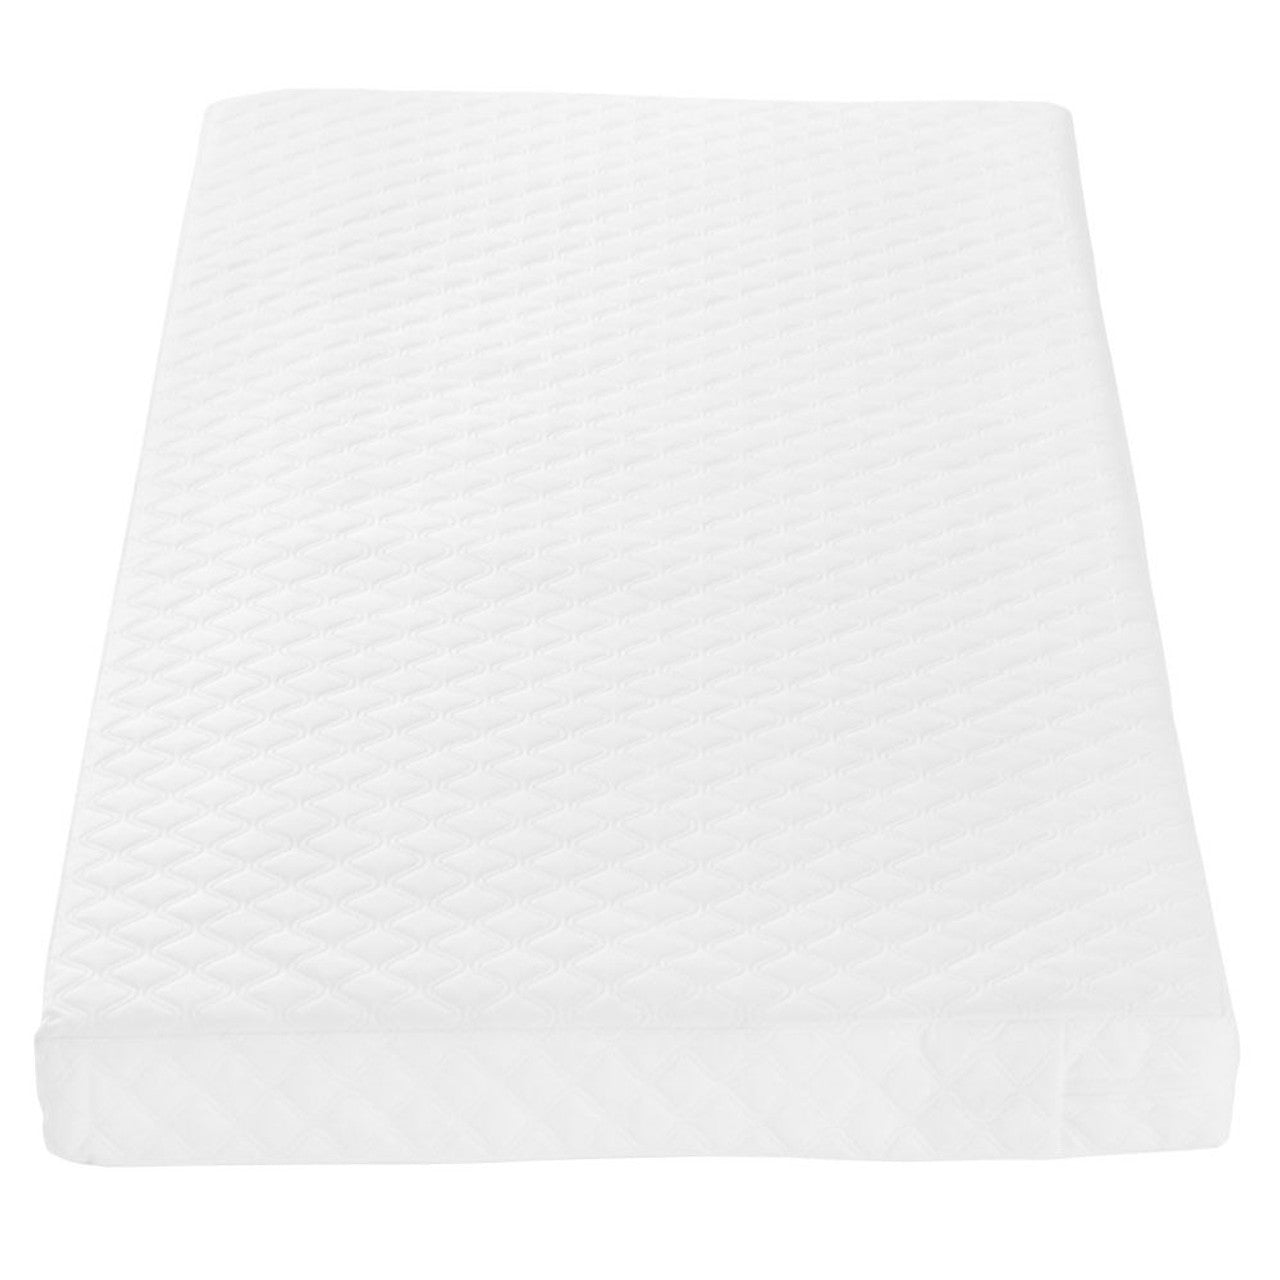 Tutti Bambini Sprung Cot Bed Mattress (70 x 140 cm) - For Your Little One